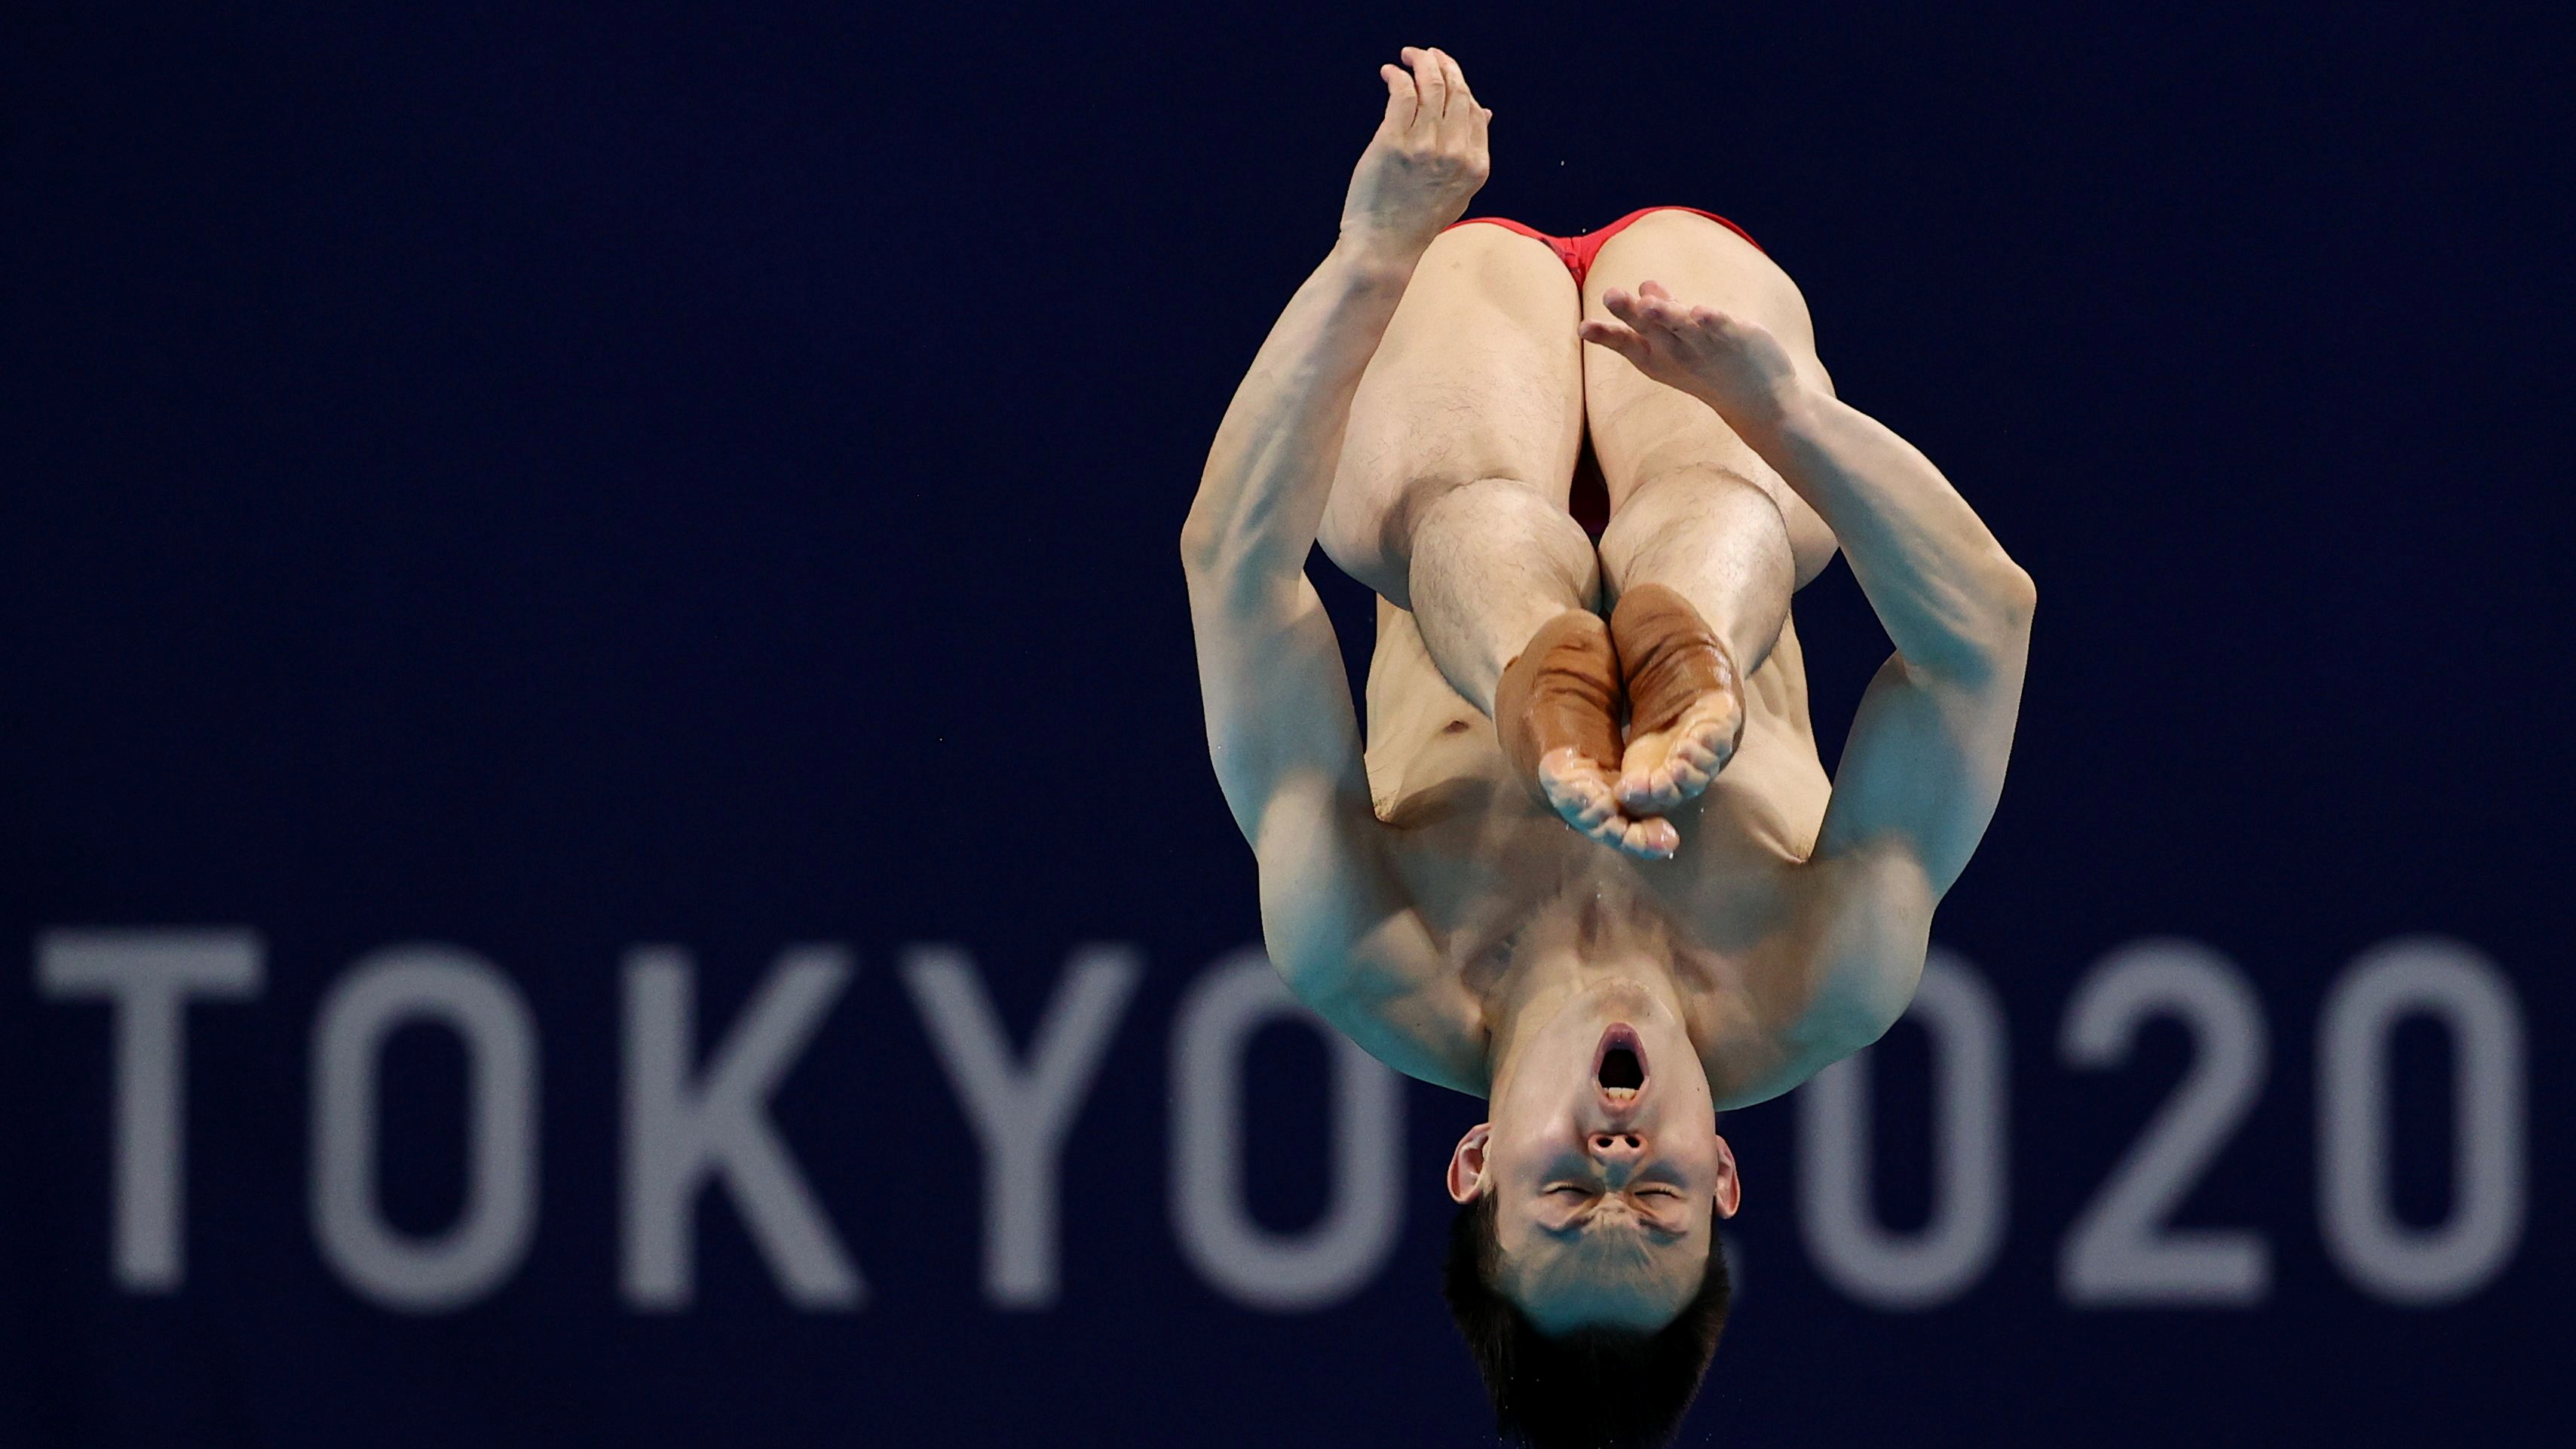 DivingChina's Xie wins gold in the men's 3m springboard Reuters